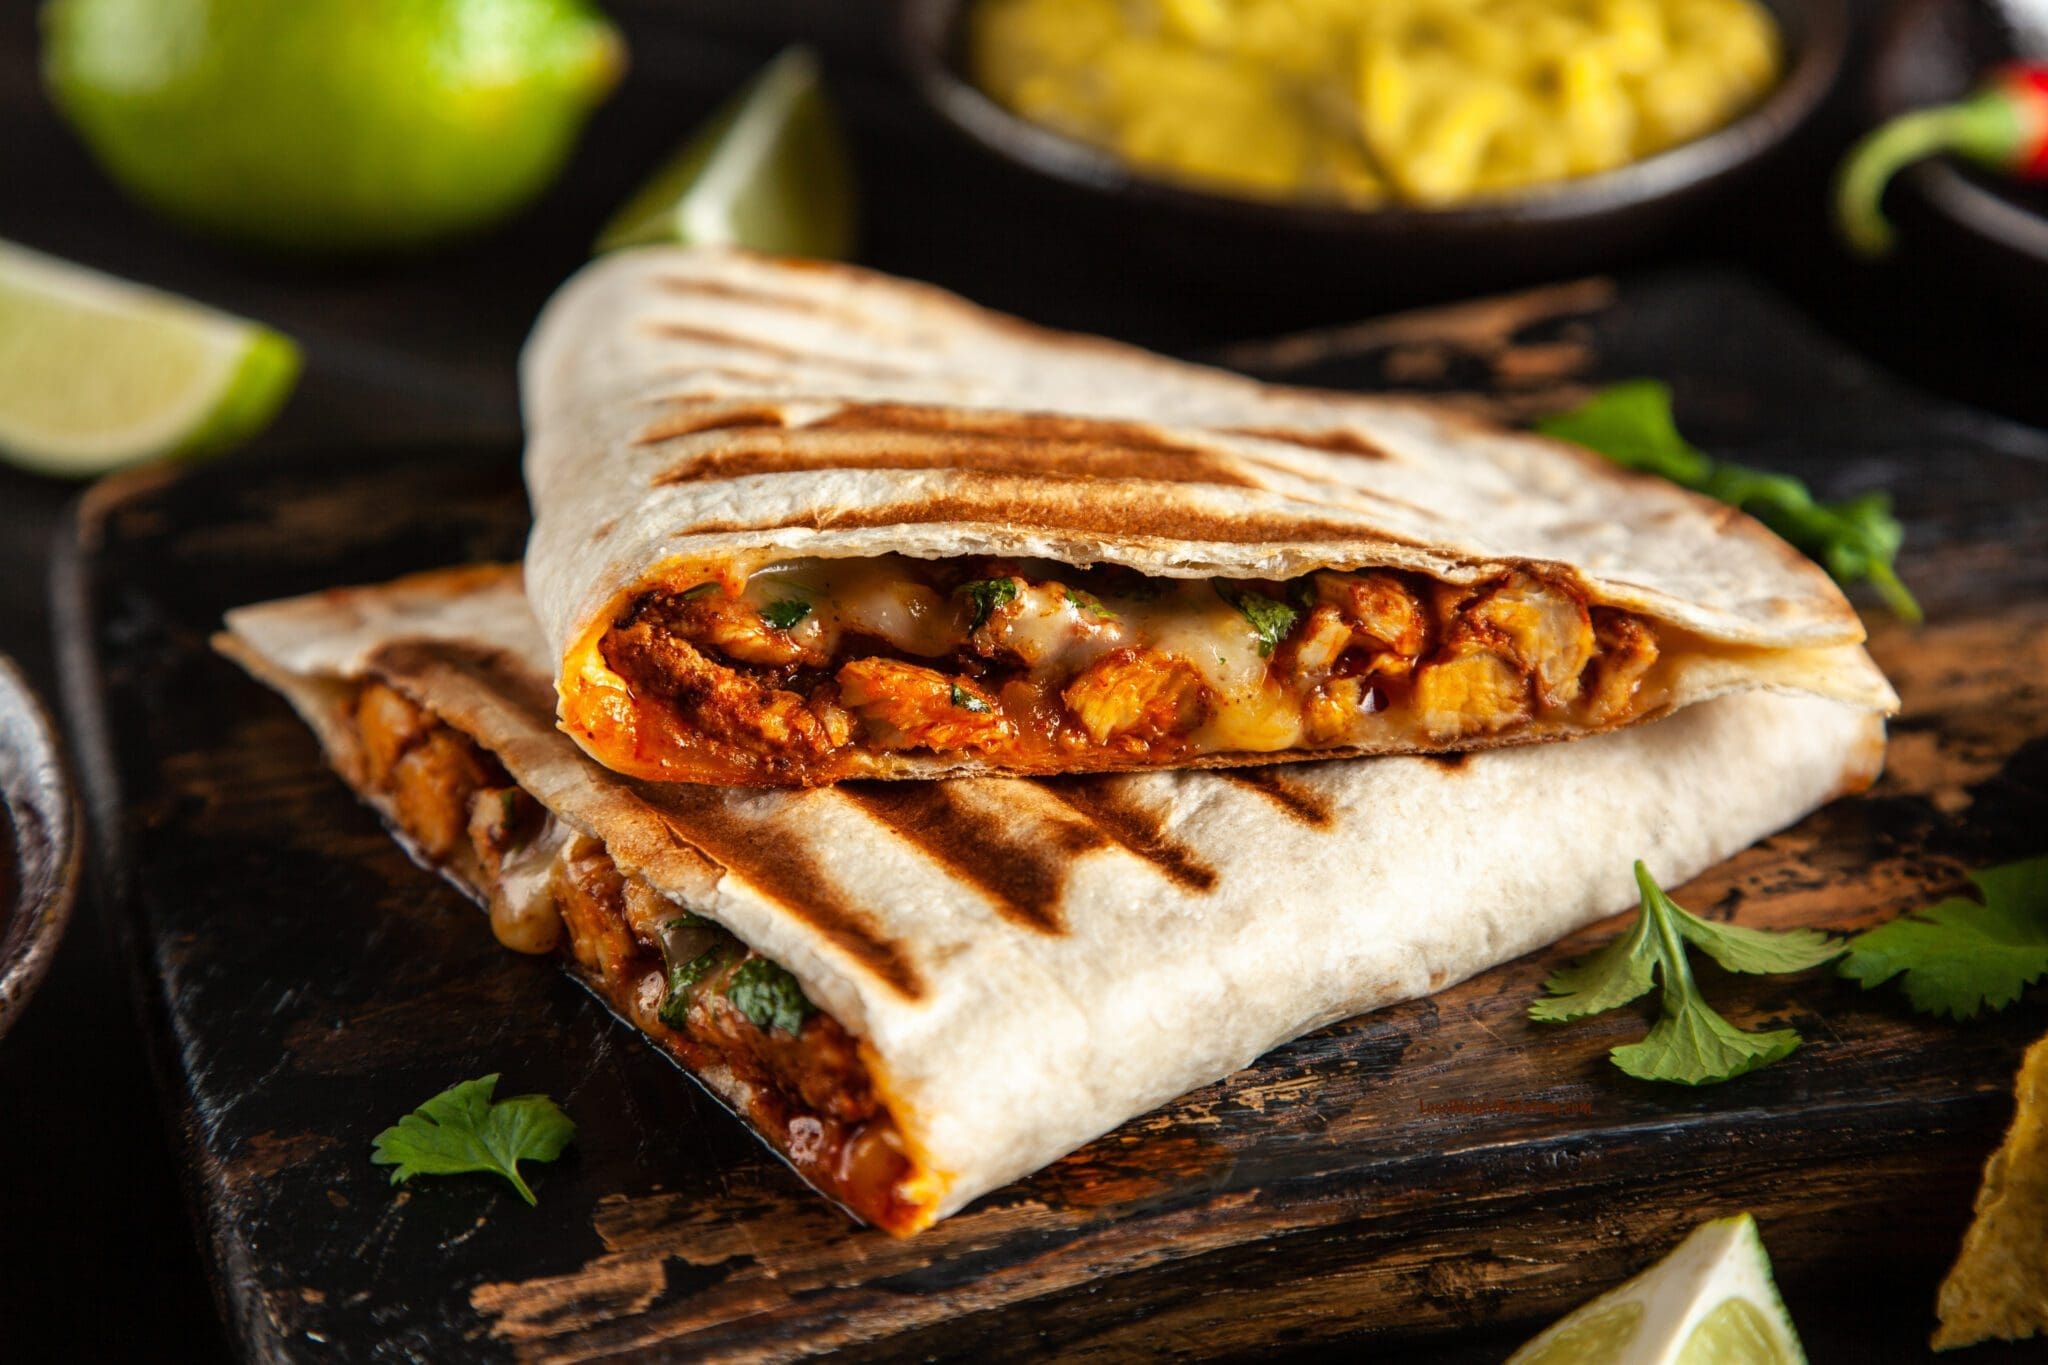 Healthy Chipotle Chicken Quesadilla - Lose Weight By Eating